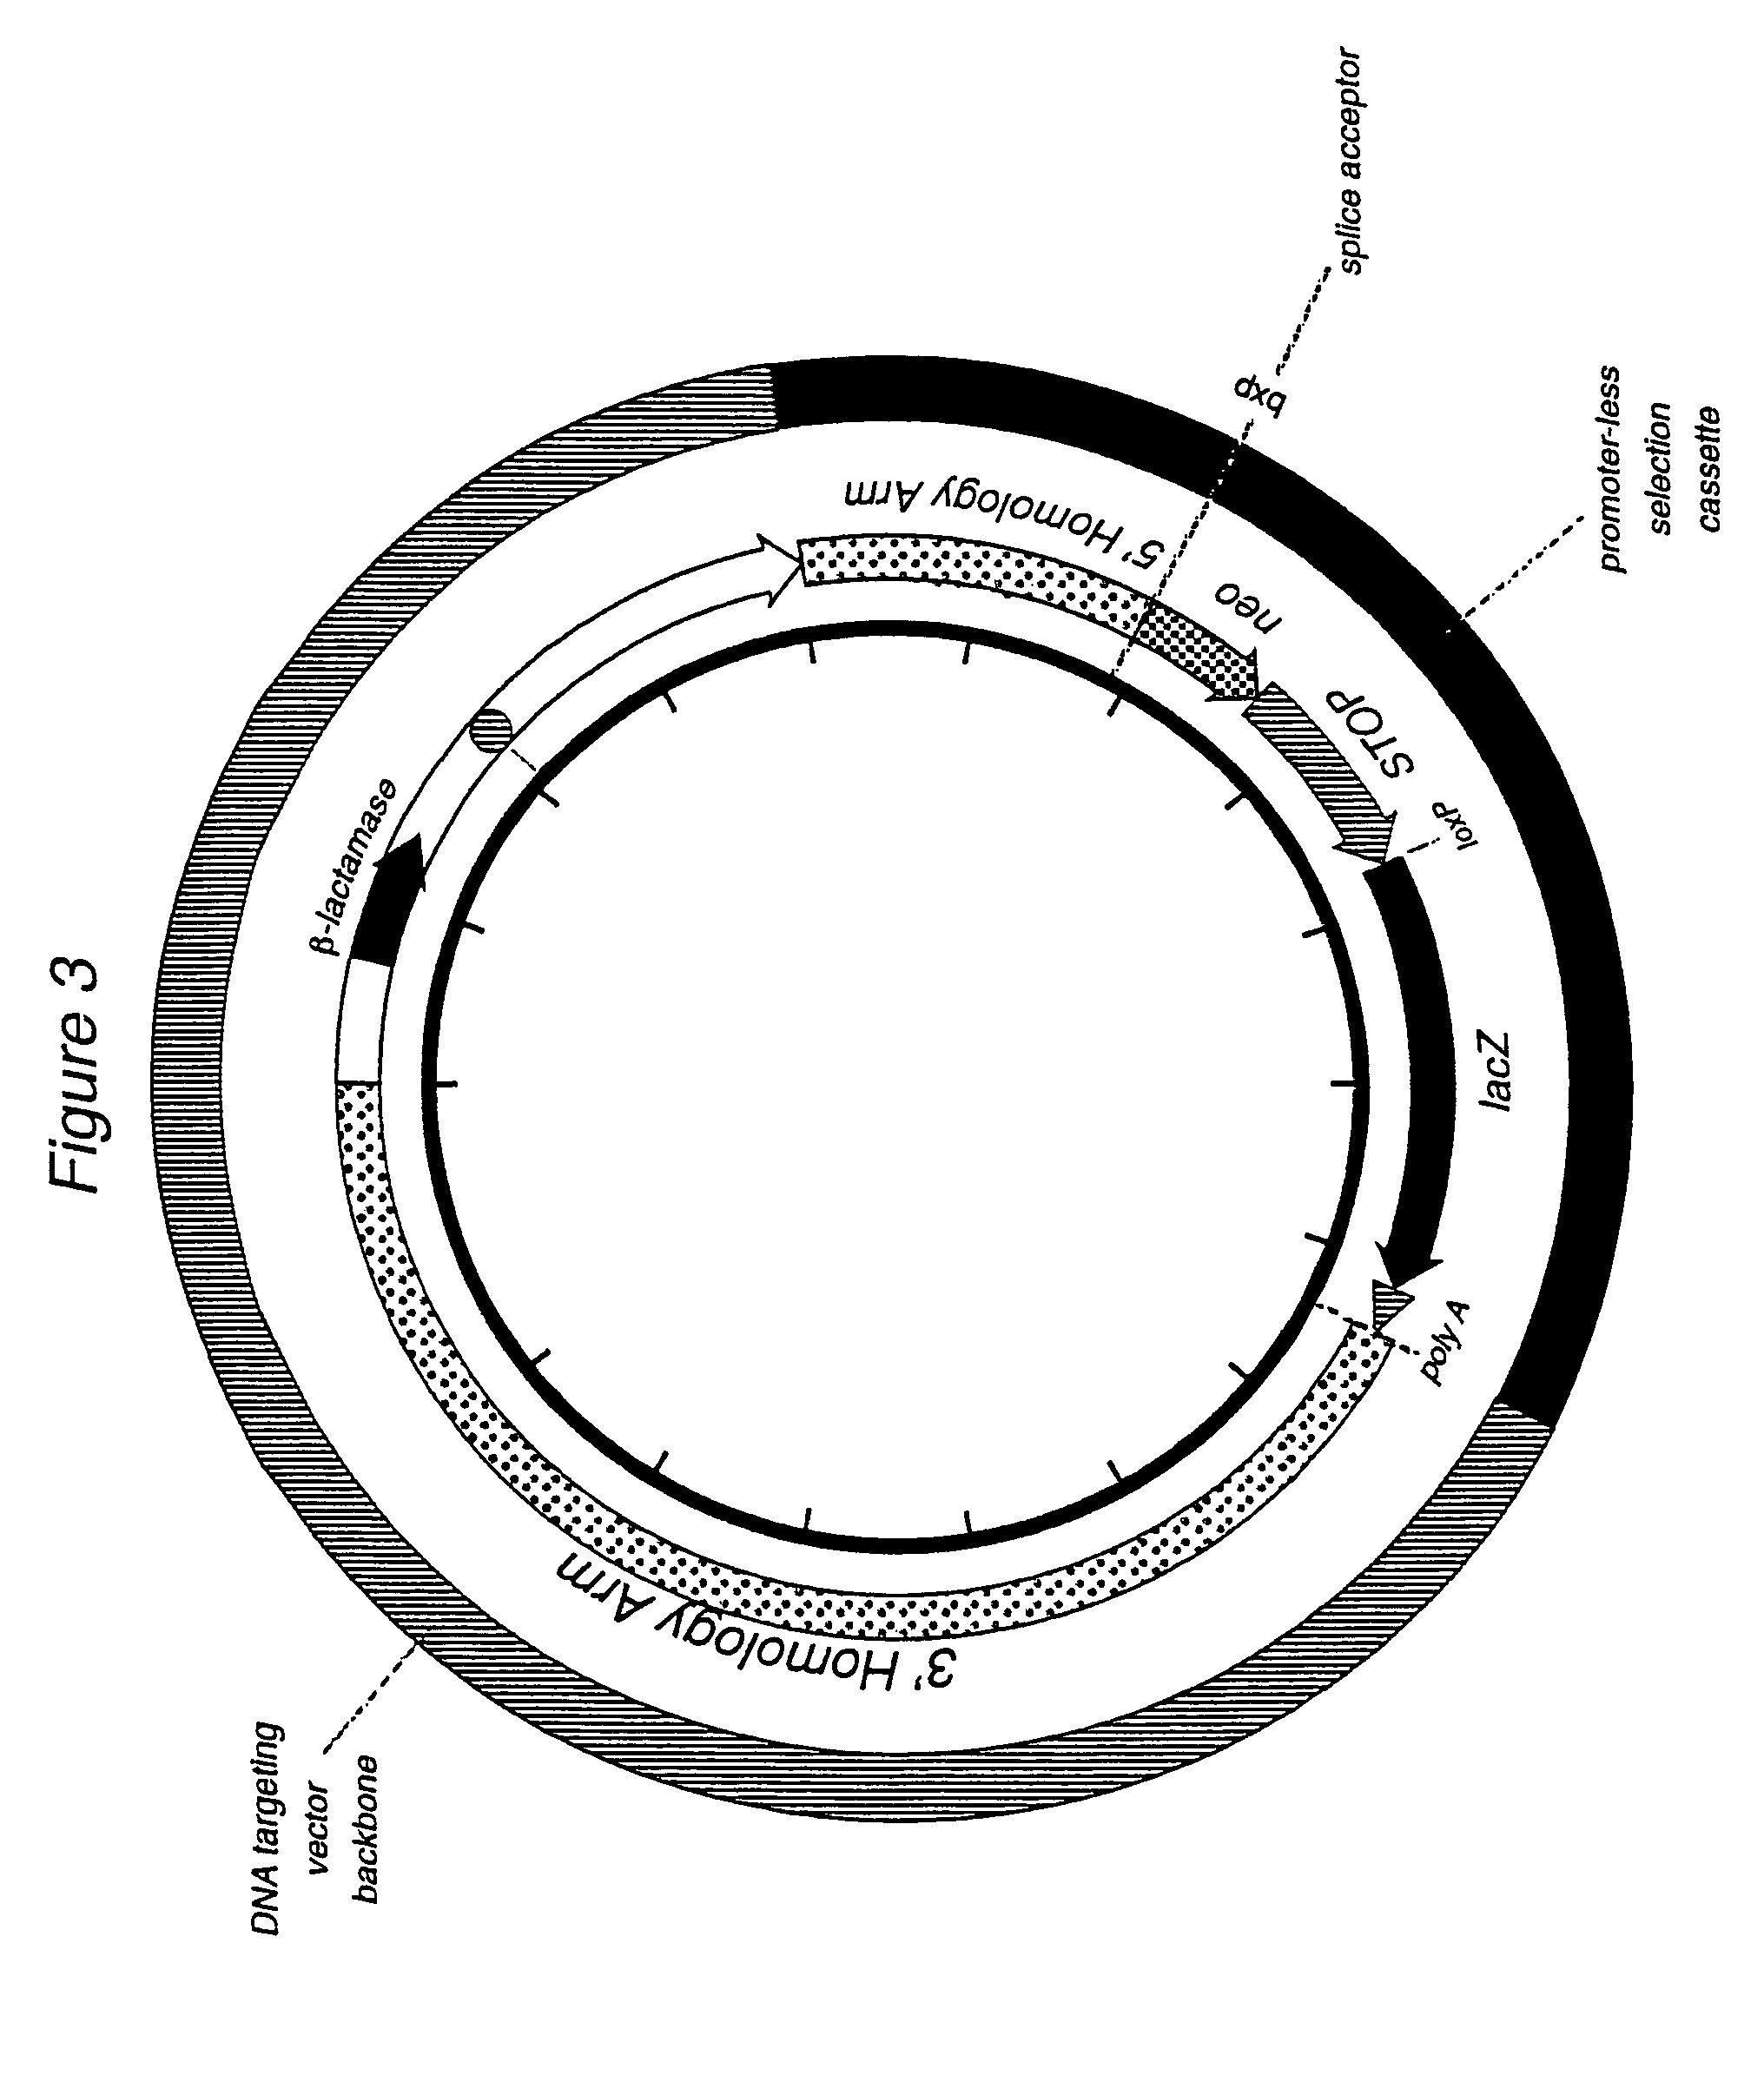 Method for targeting transcriptionally active loci